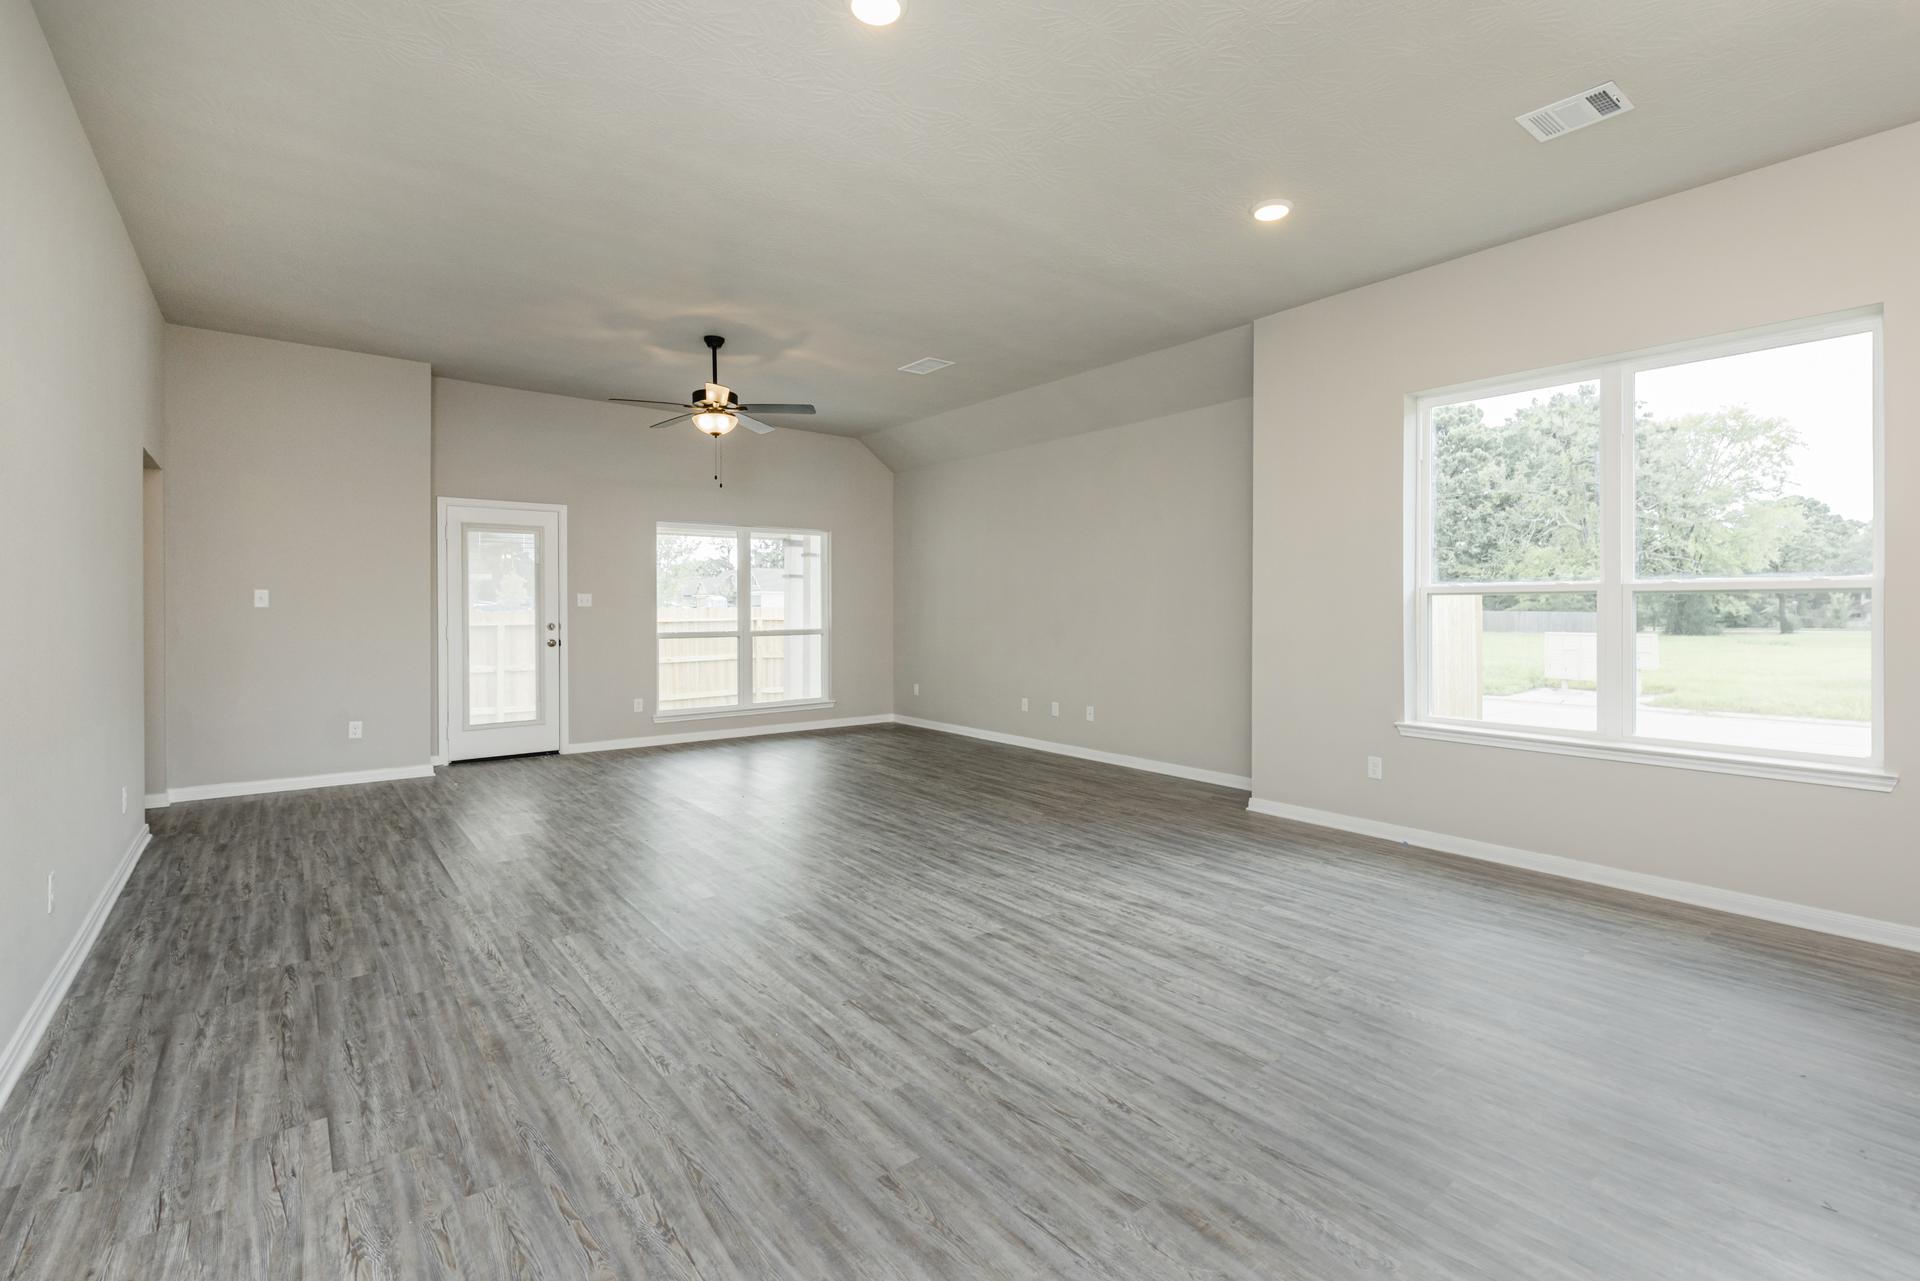 S-1818 New Home in Conroe, TX